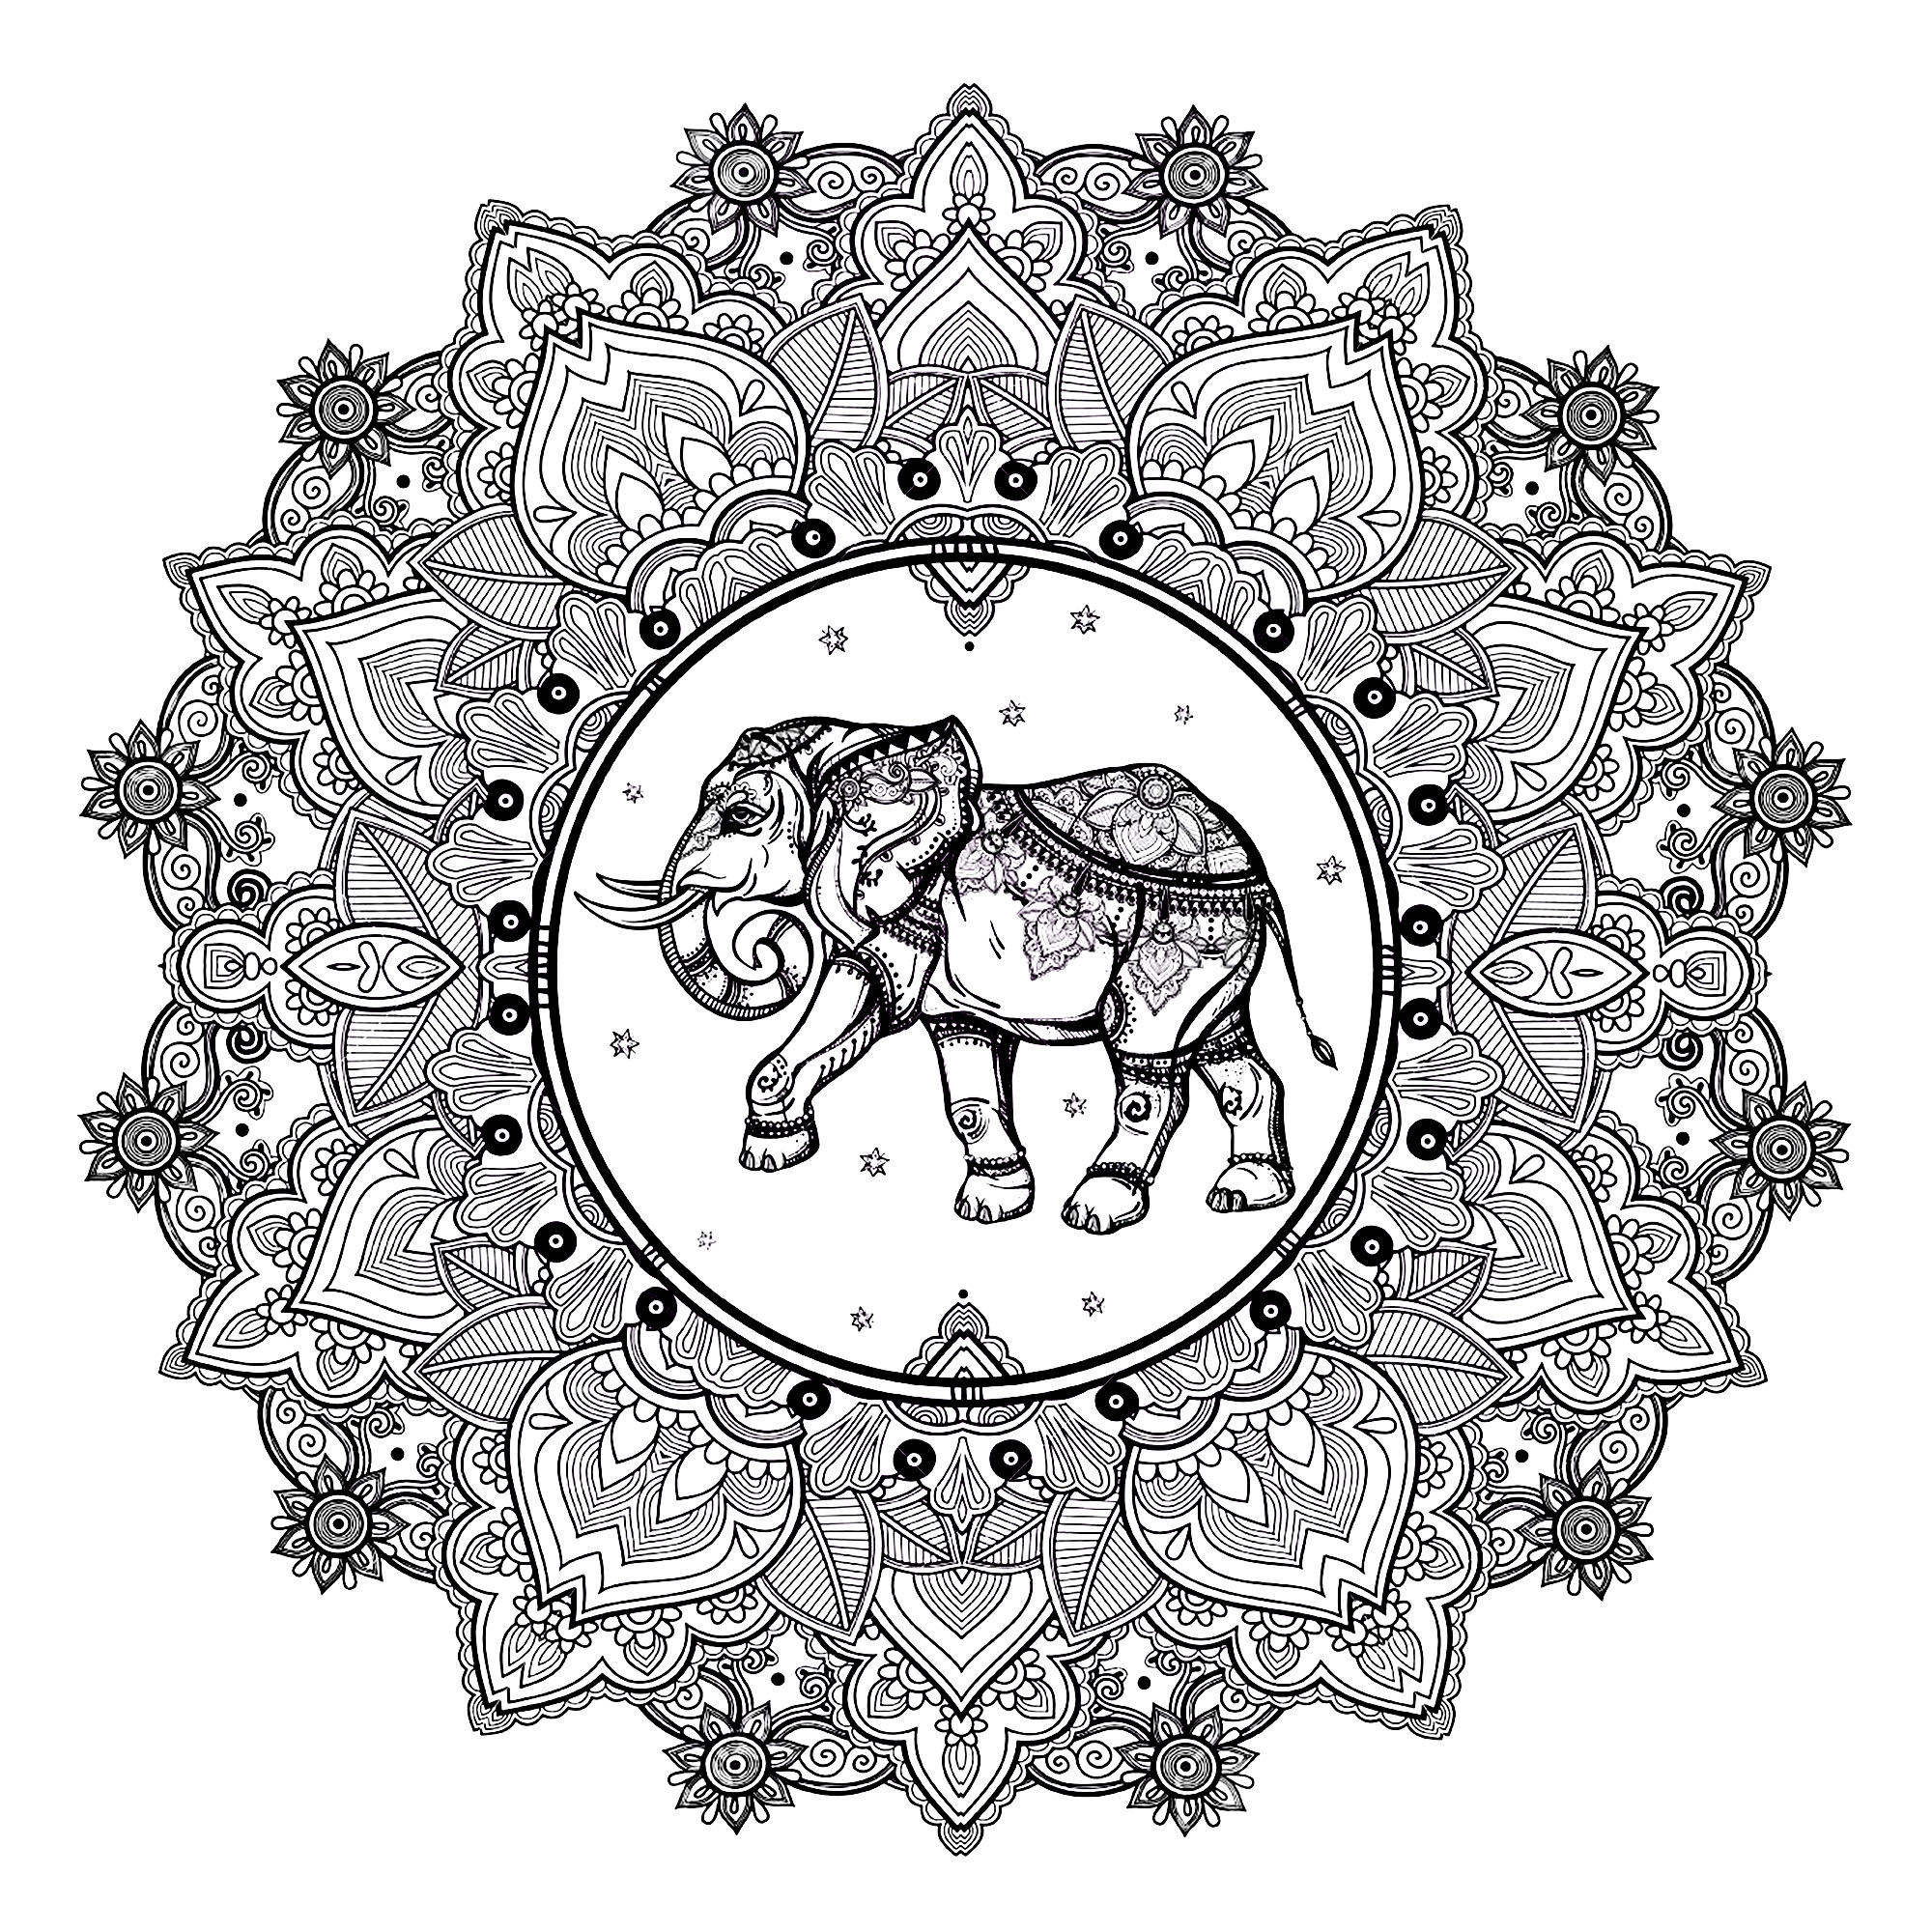 Mandala to print and color, with beautiful elephant in center